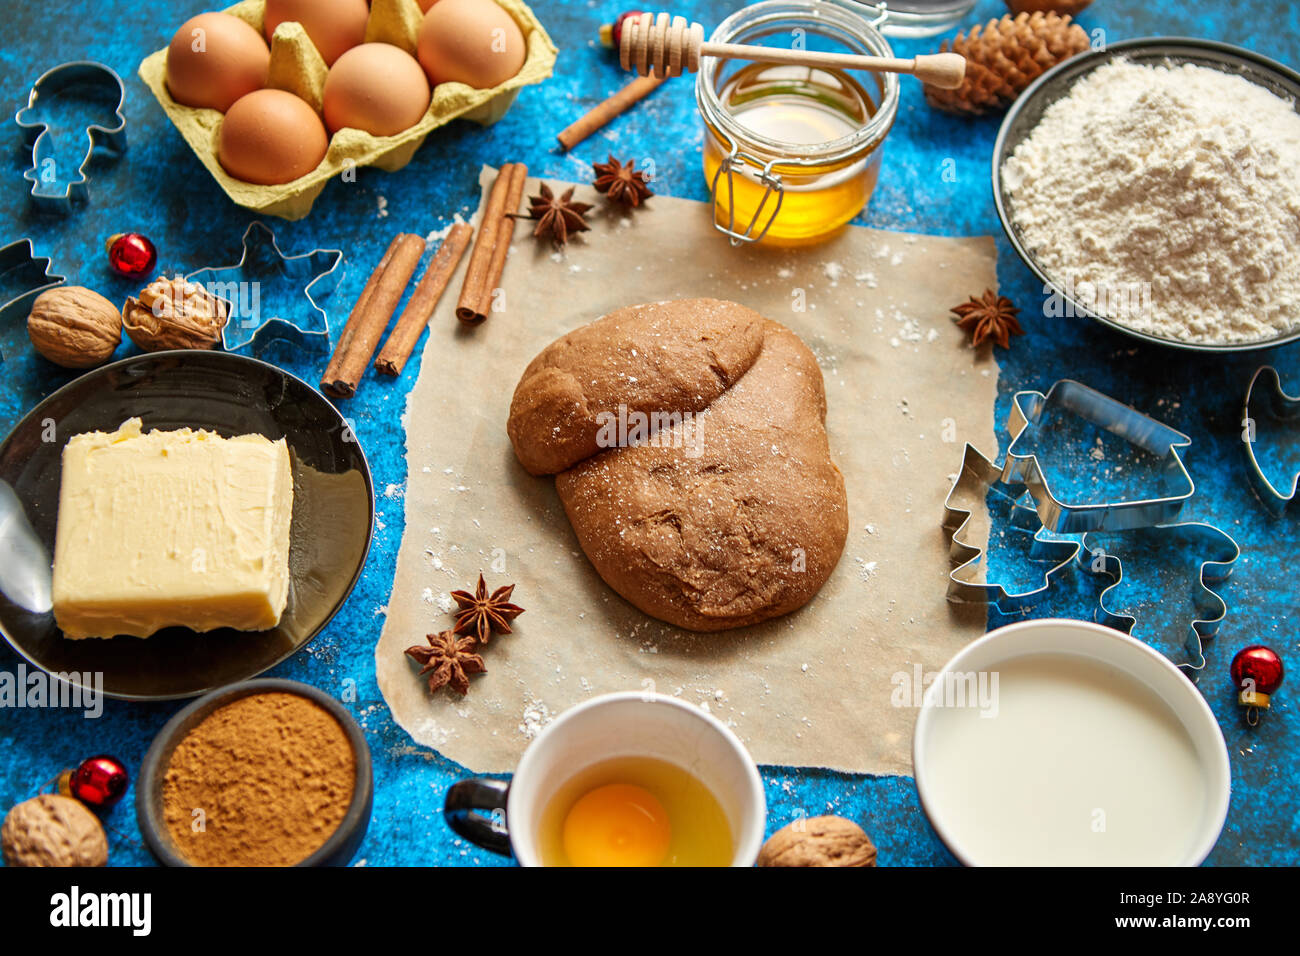 https://c8.alamy.com/comp/2A8YG0R/gingerbread-dough-placed-among-various-ingredients-christmas-baking-concept-2A8YG0R.jpg